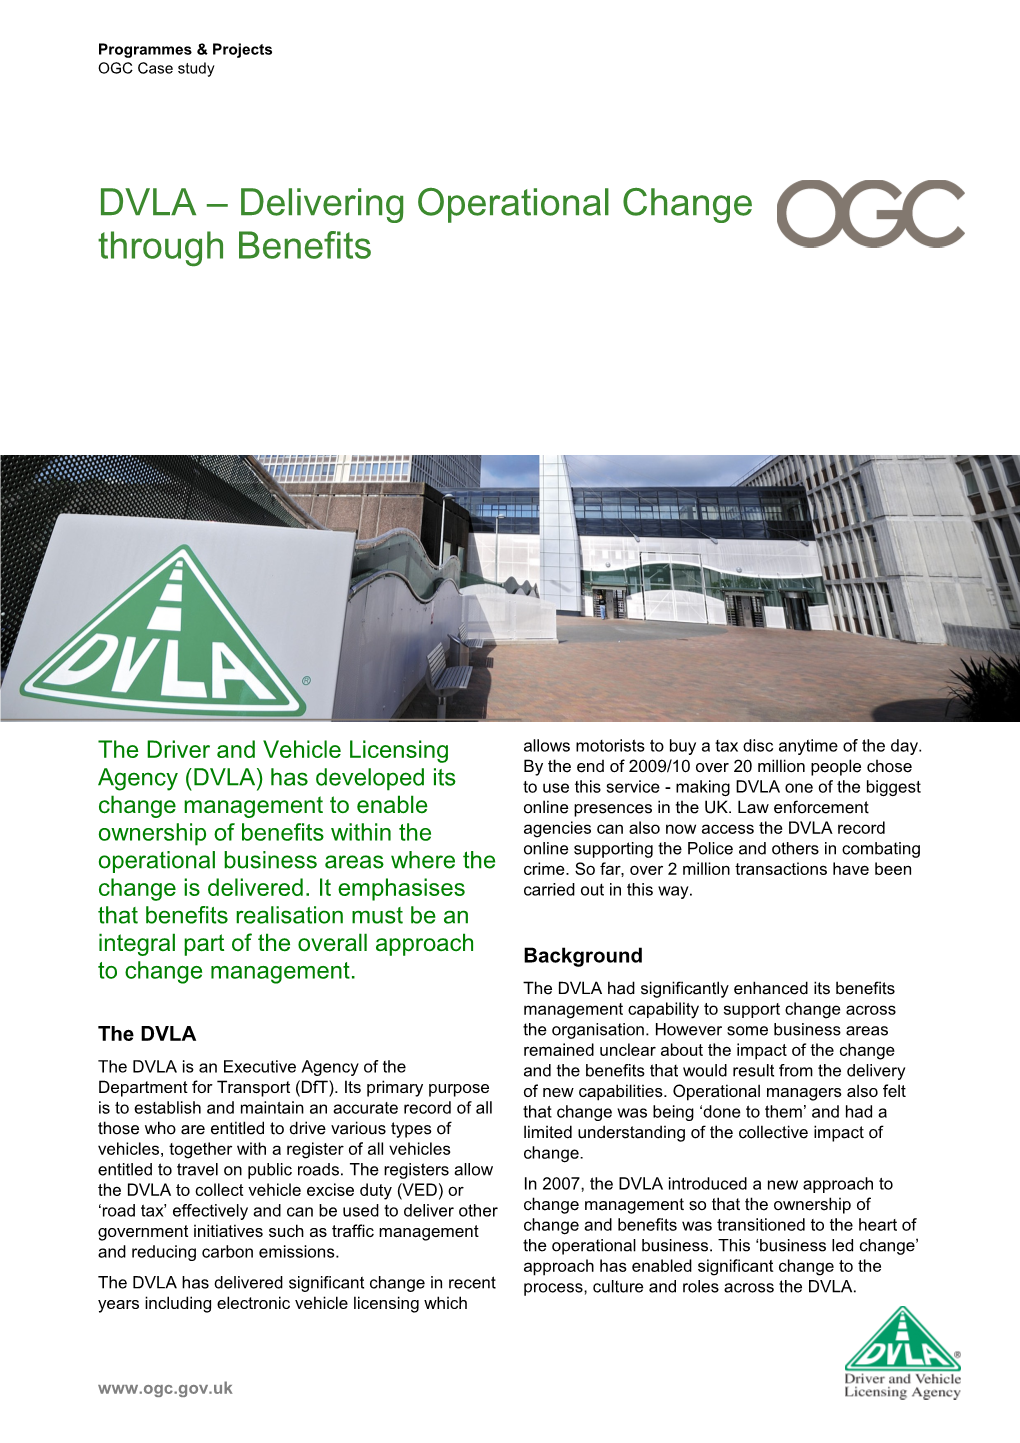 The Driver and Vehicle Licensing Agency (DVLA) Has Developed Its Change Management to Enable